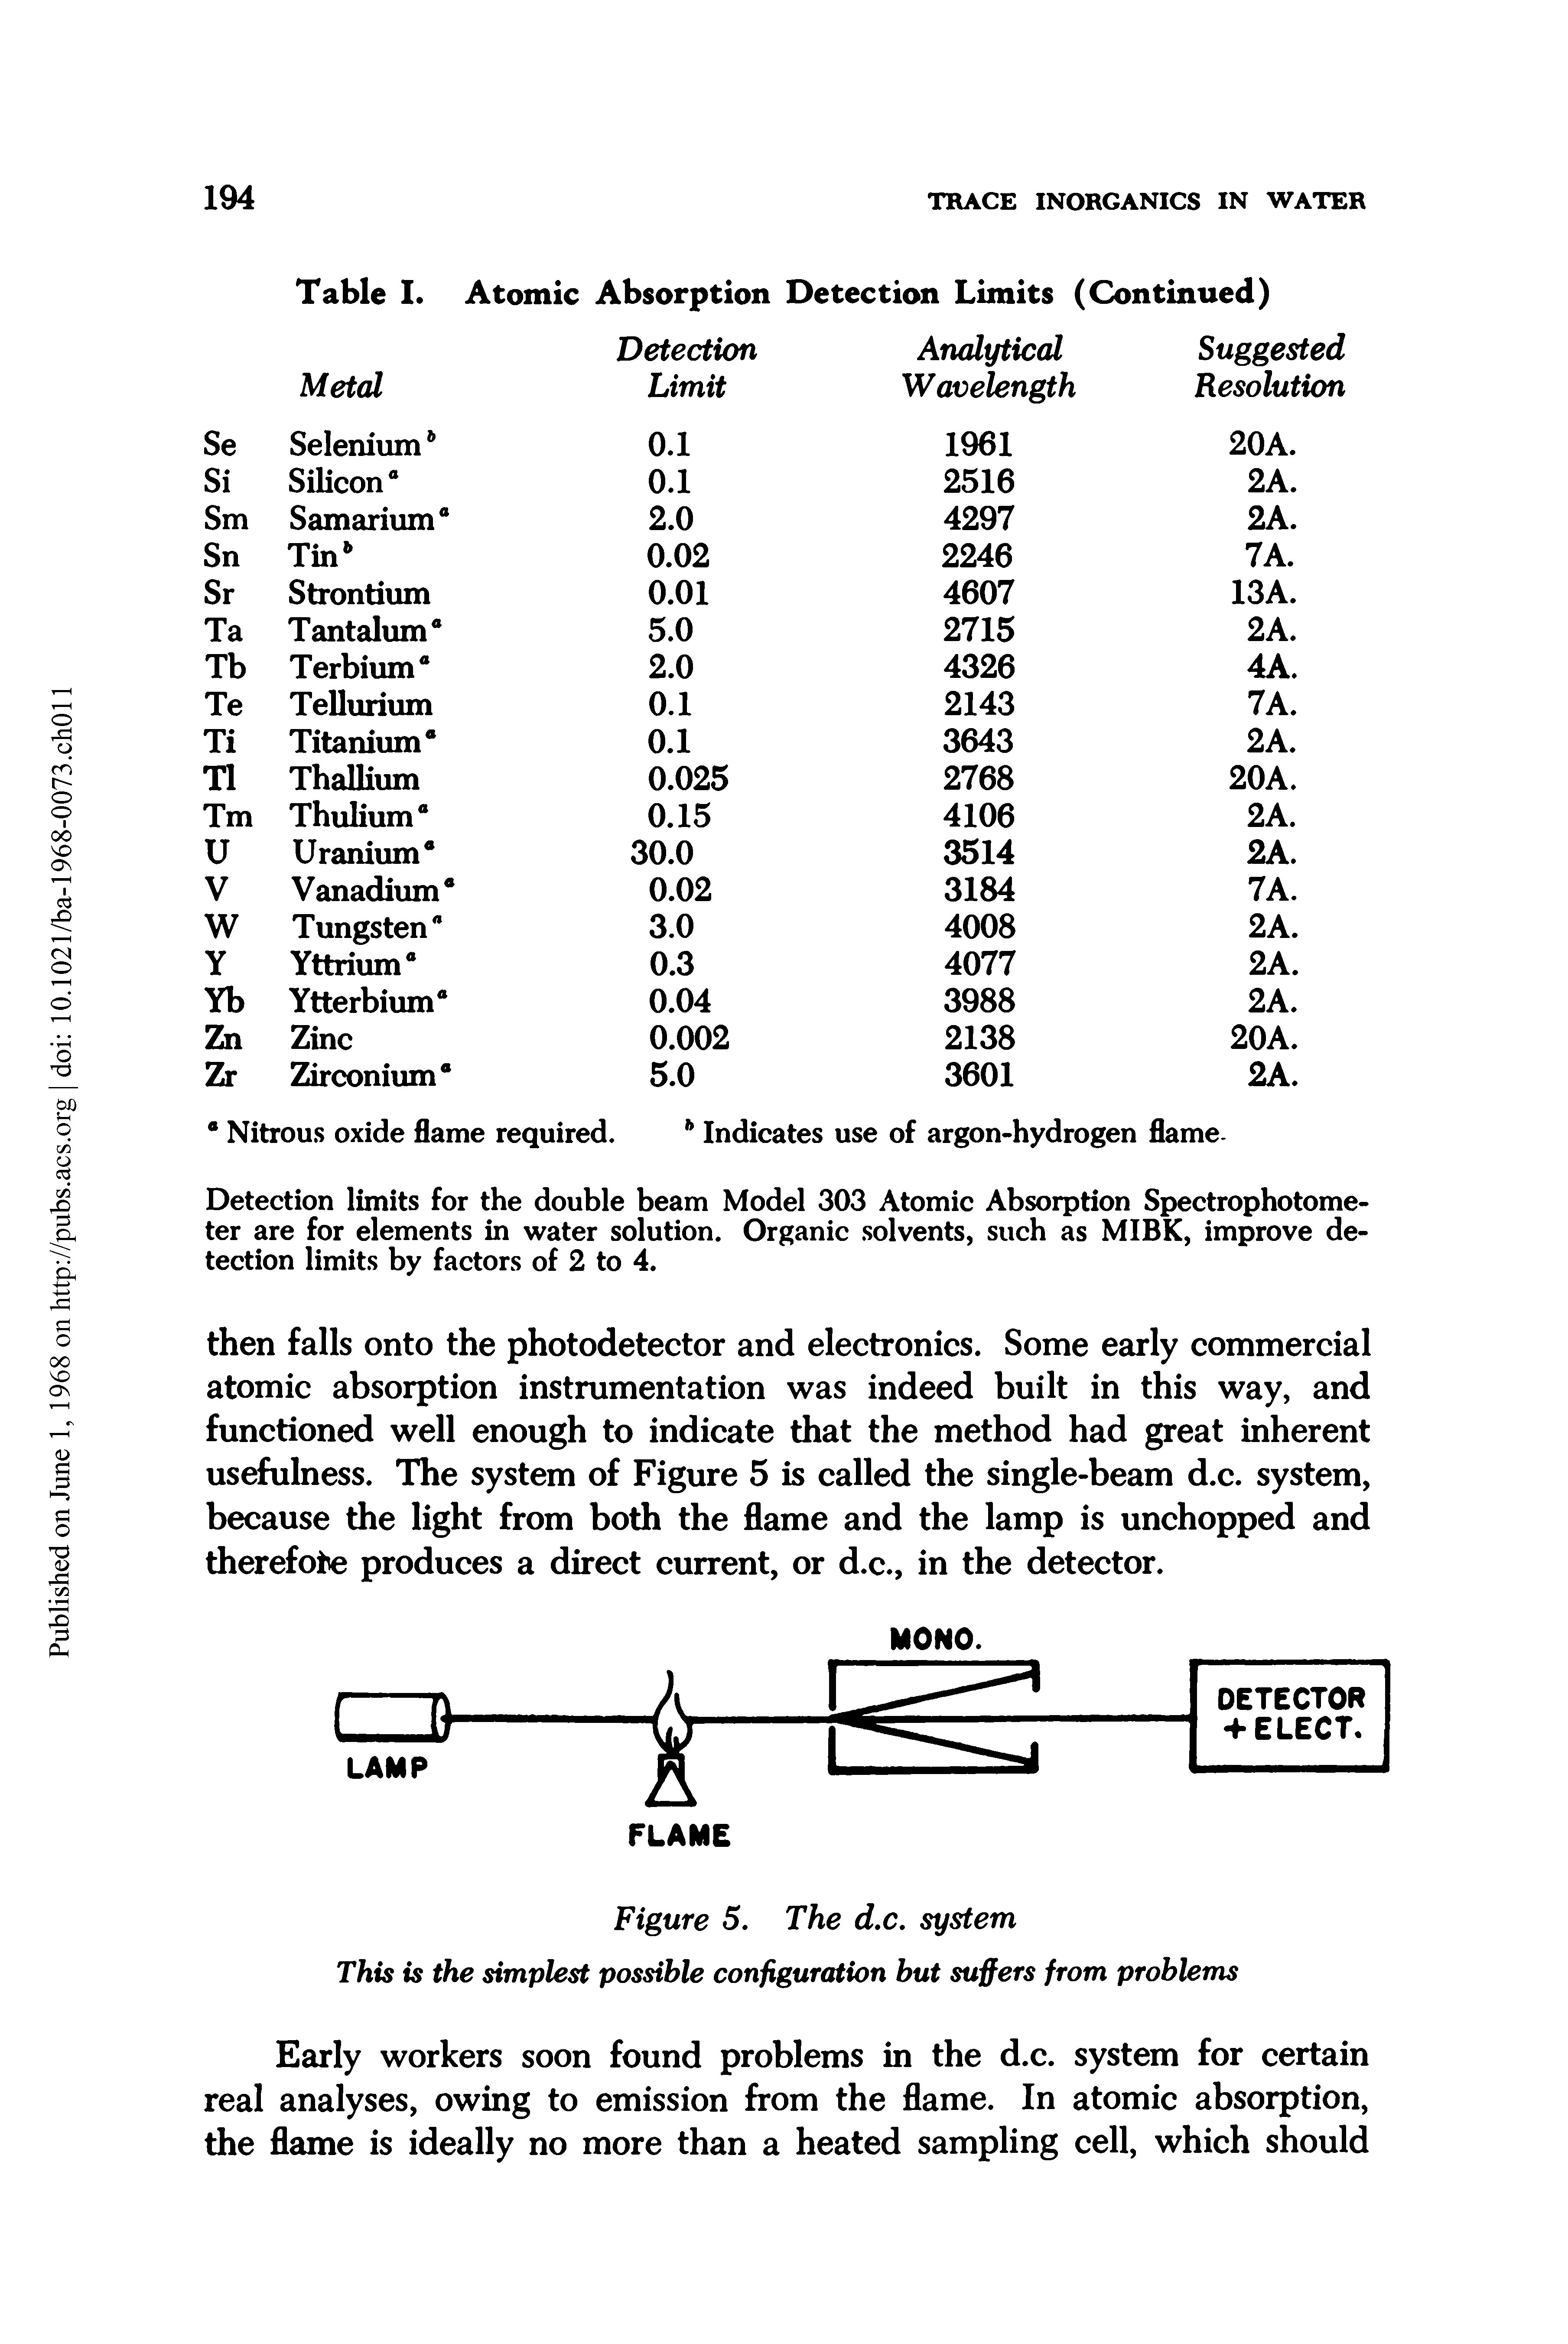 Table I. Atomic Absorption Detection Limits (Continued) ...